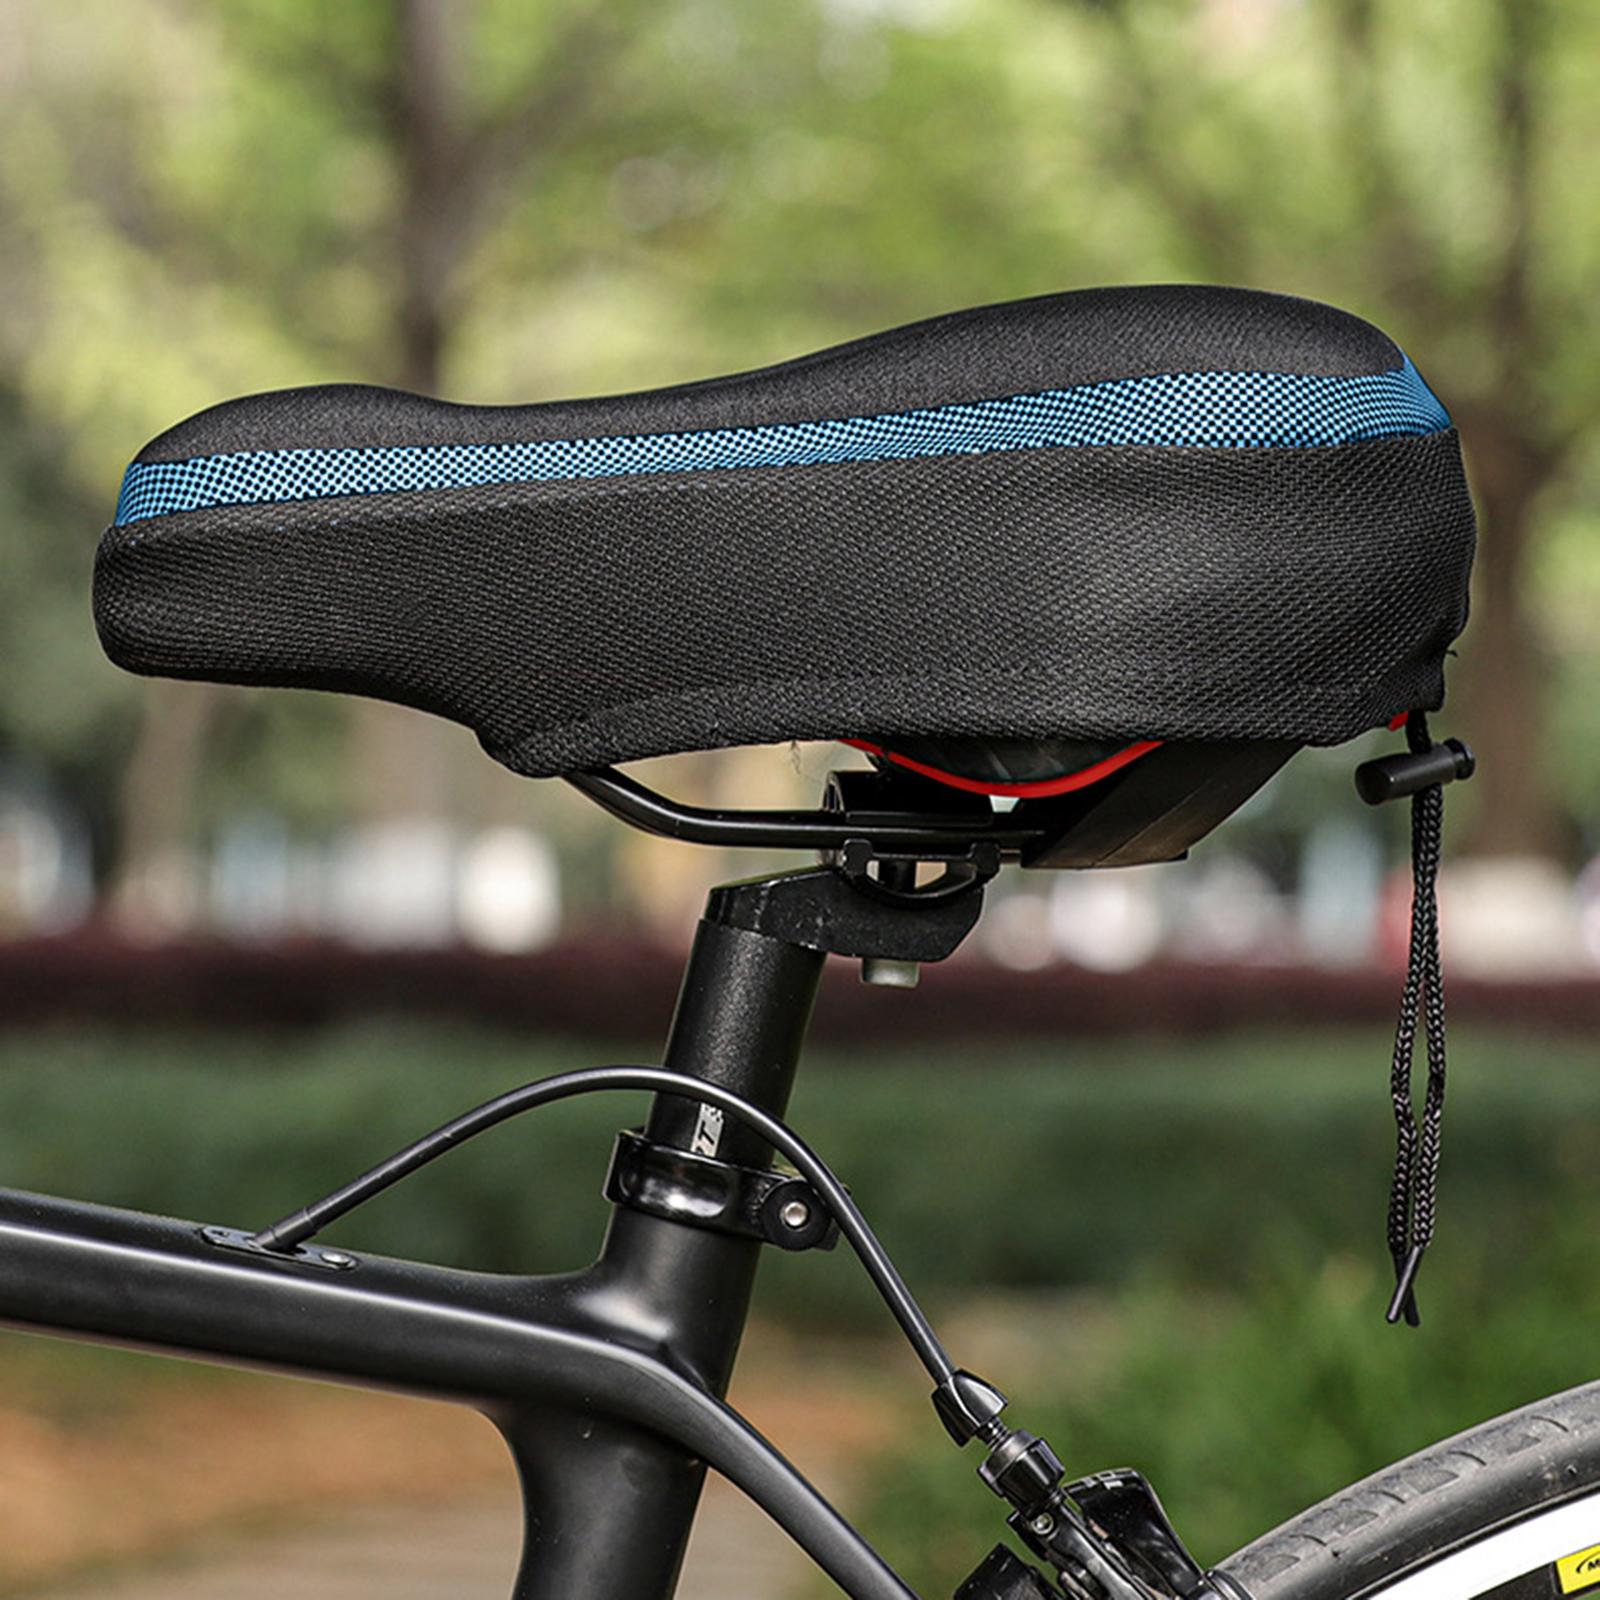 Bike Seat Cover Comfort Padding Soft Silicone Saddle Cushion Accessories Black and Blue